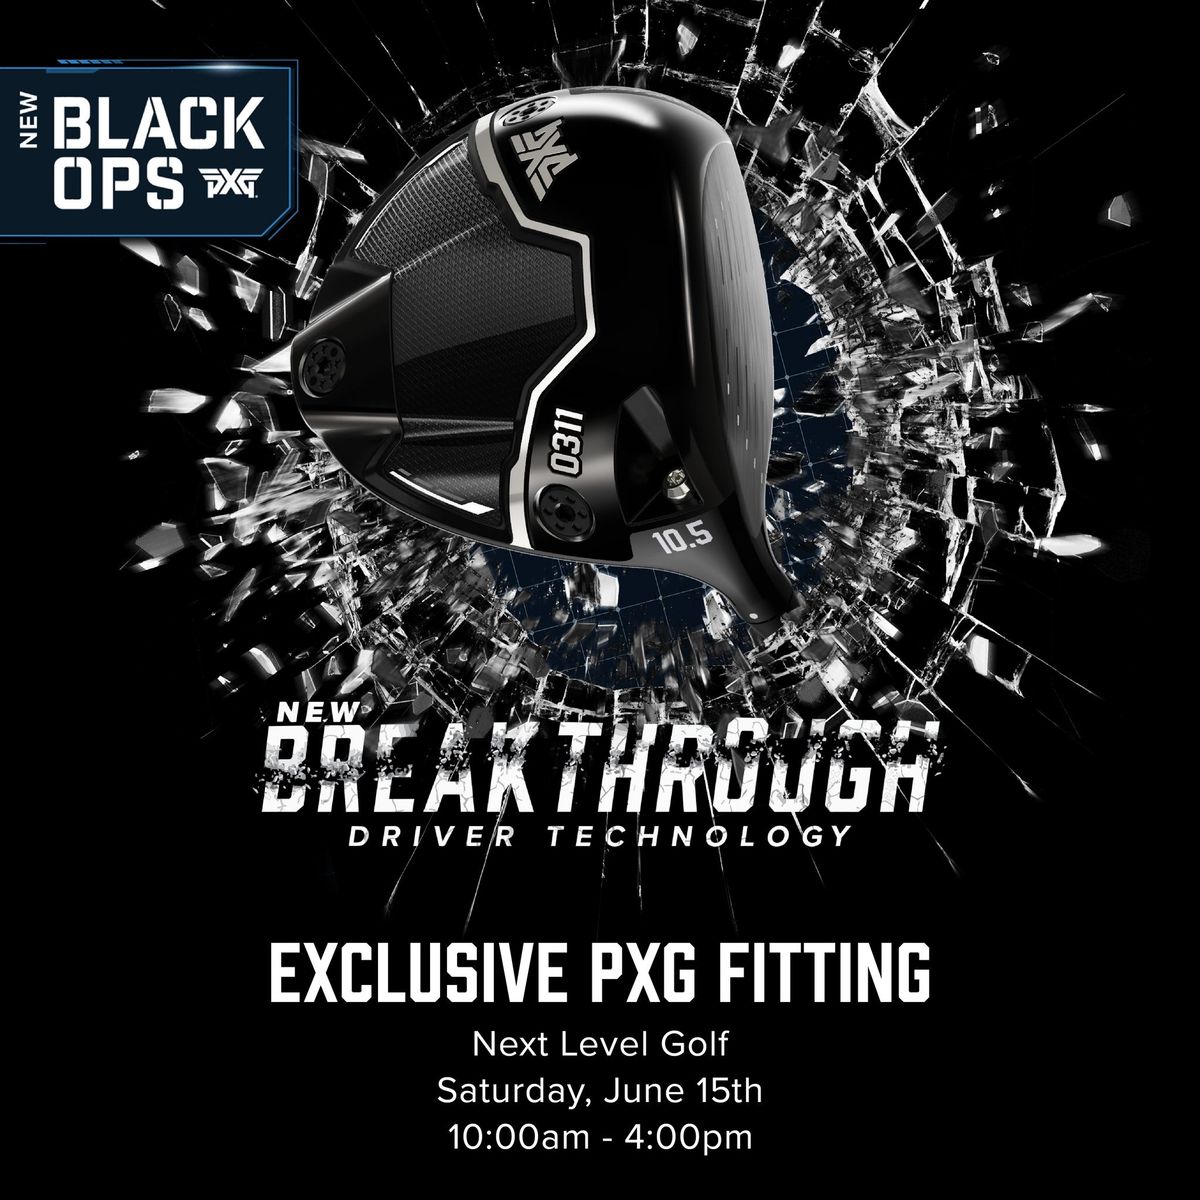 PXG Club Fitting at Next Level Golf